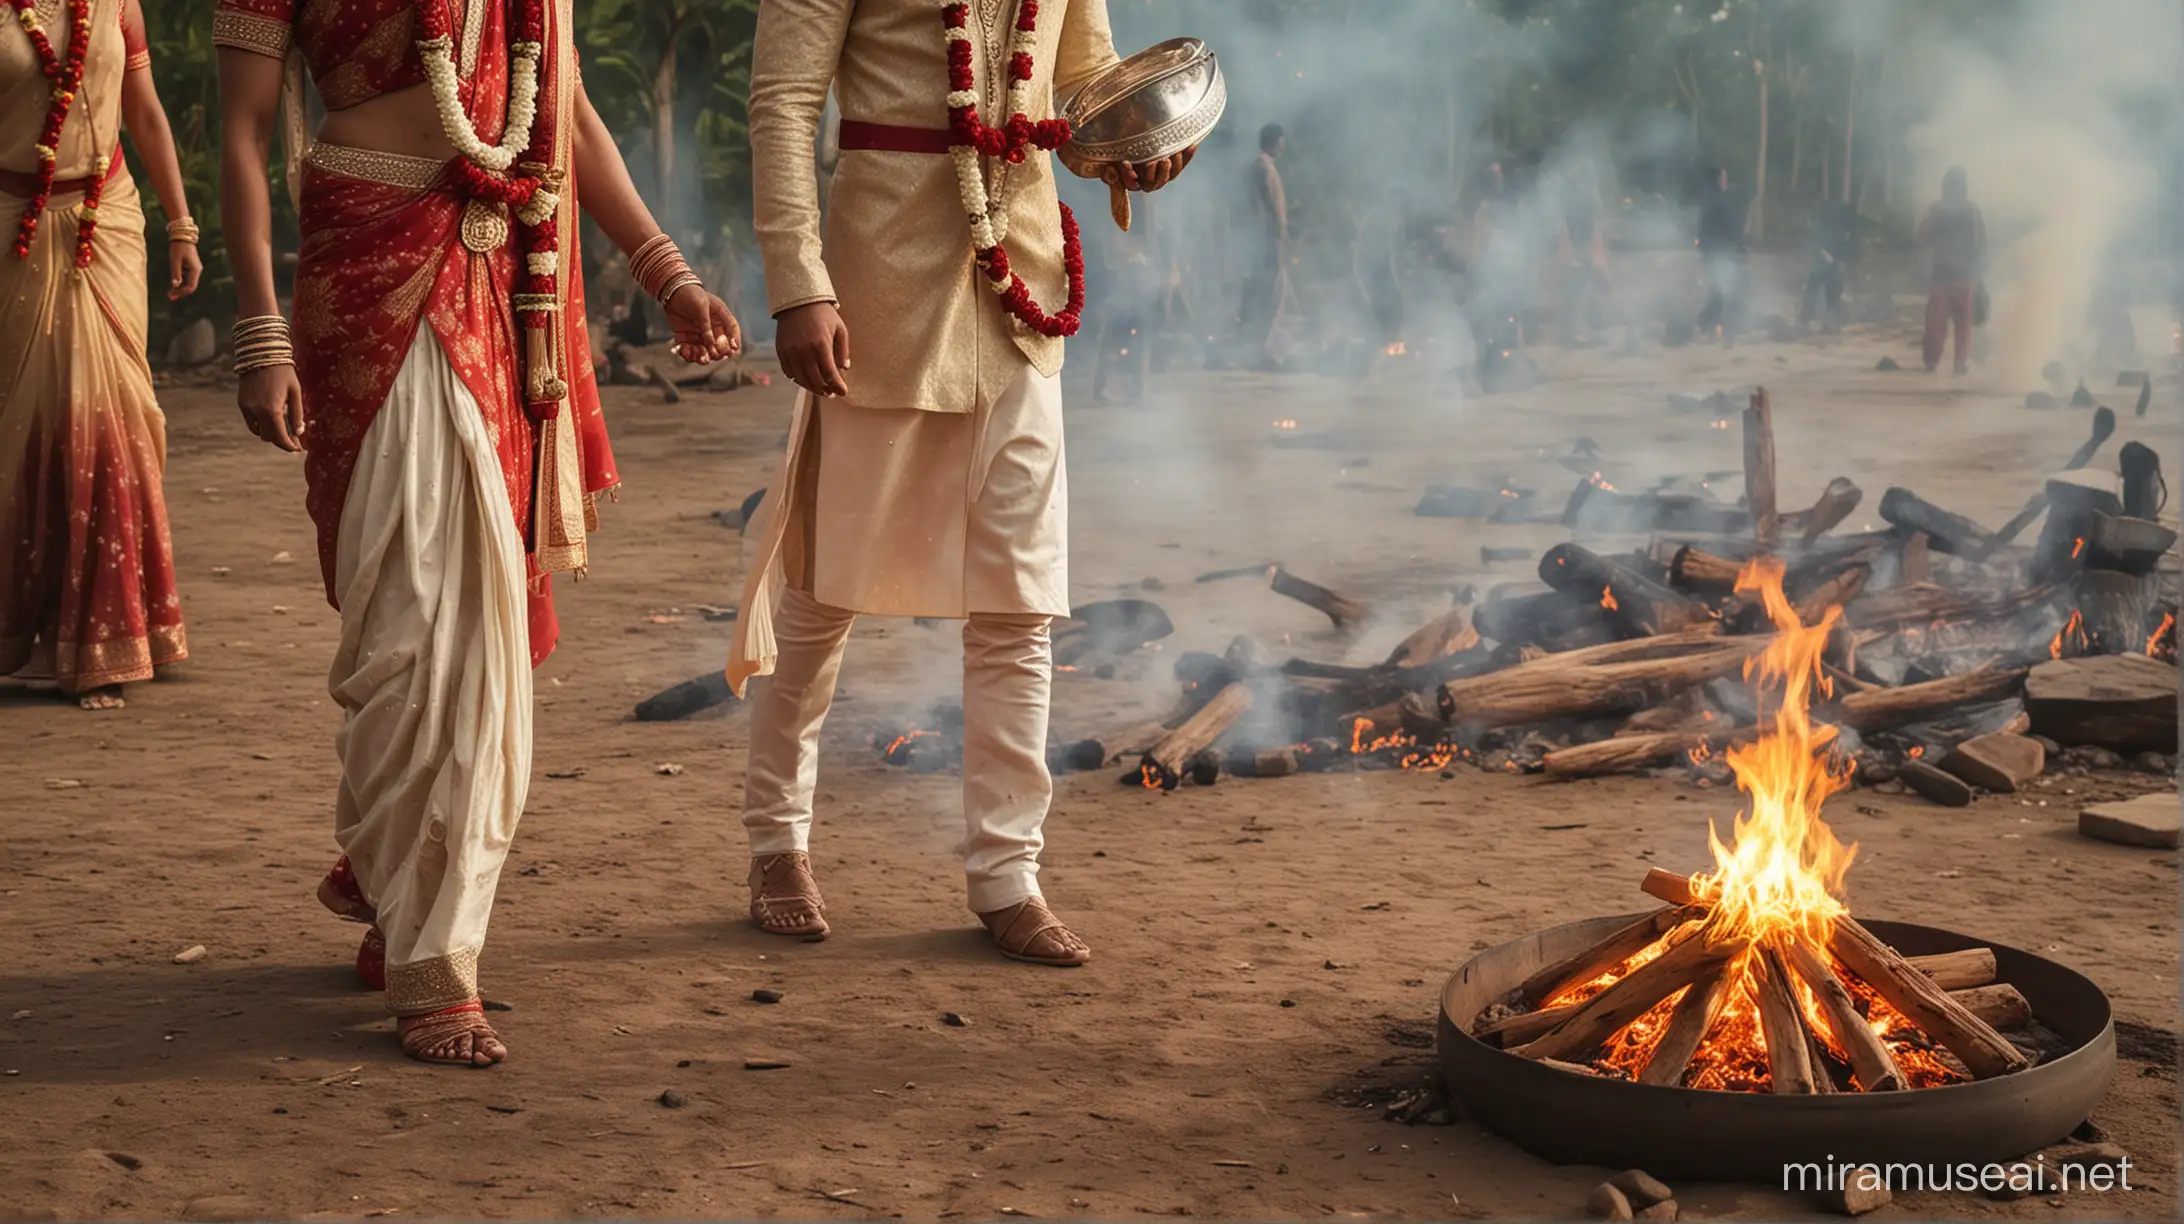 image of an Indian wedding ceremony, 'saat phere' (seven steps) ritual. Show the bride and groom walking around a sacred fire.